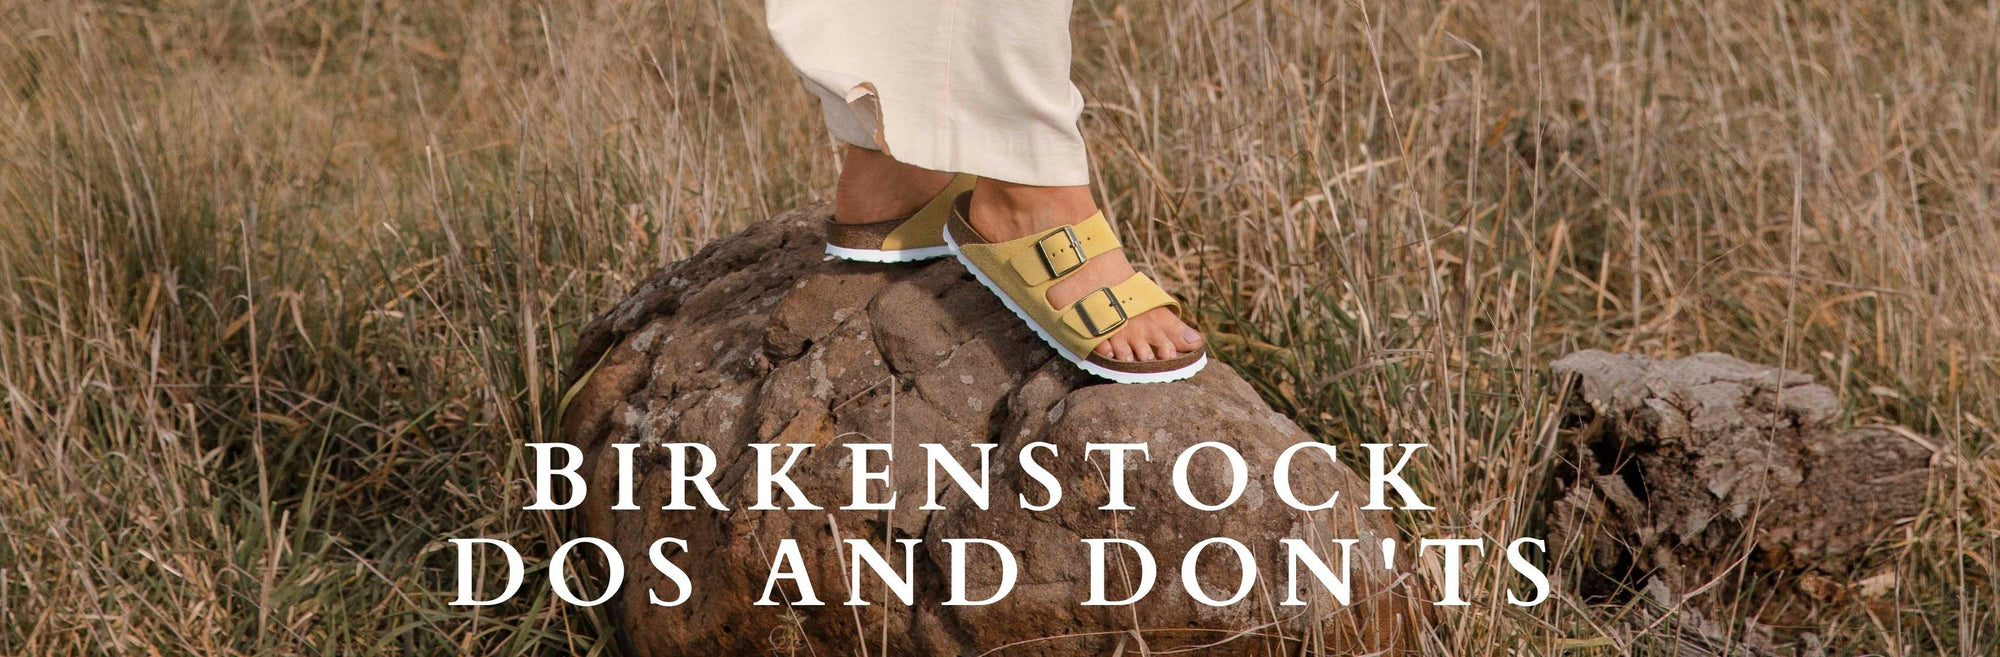 Birkenstock Dos and Don'ts